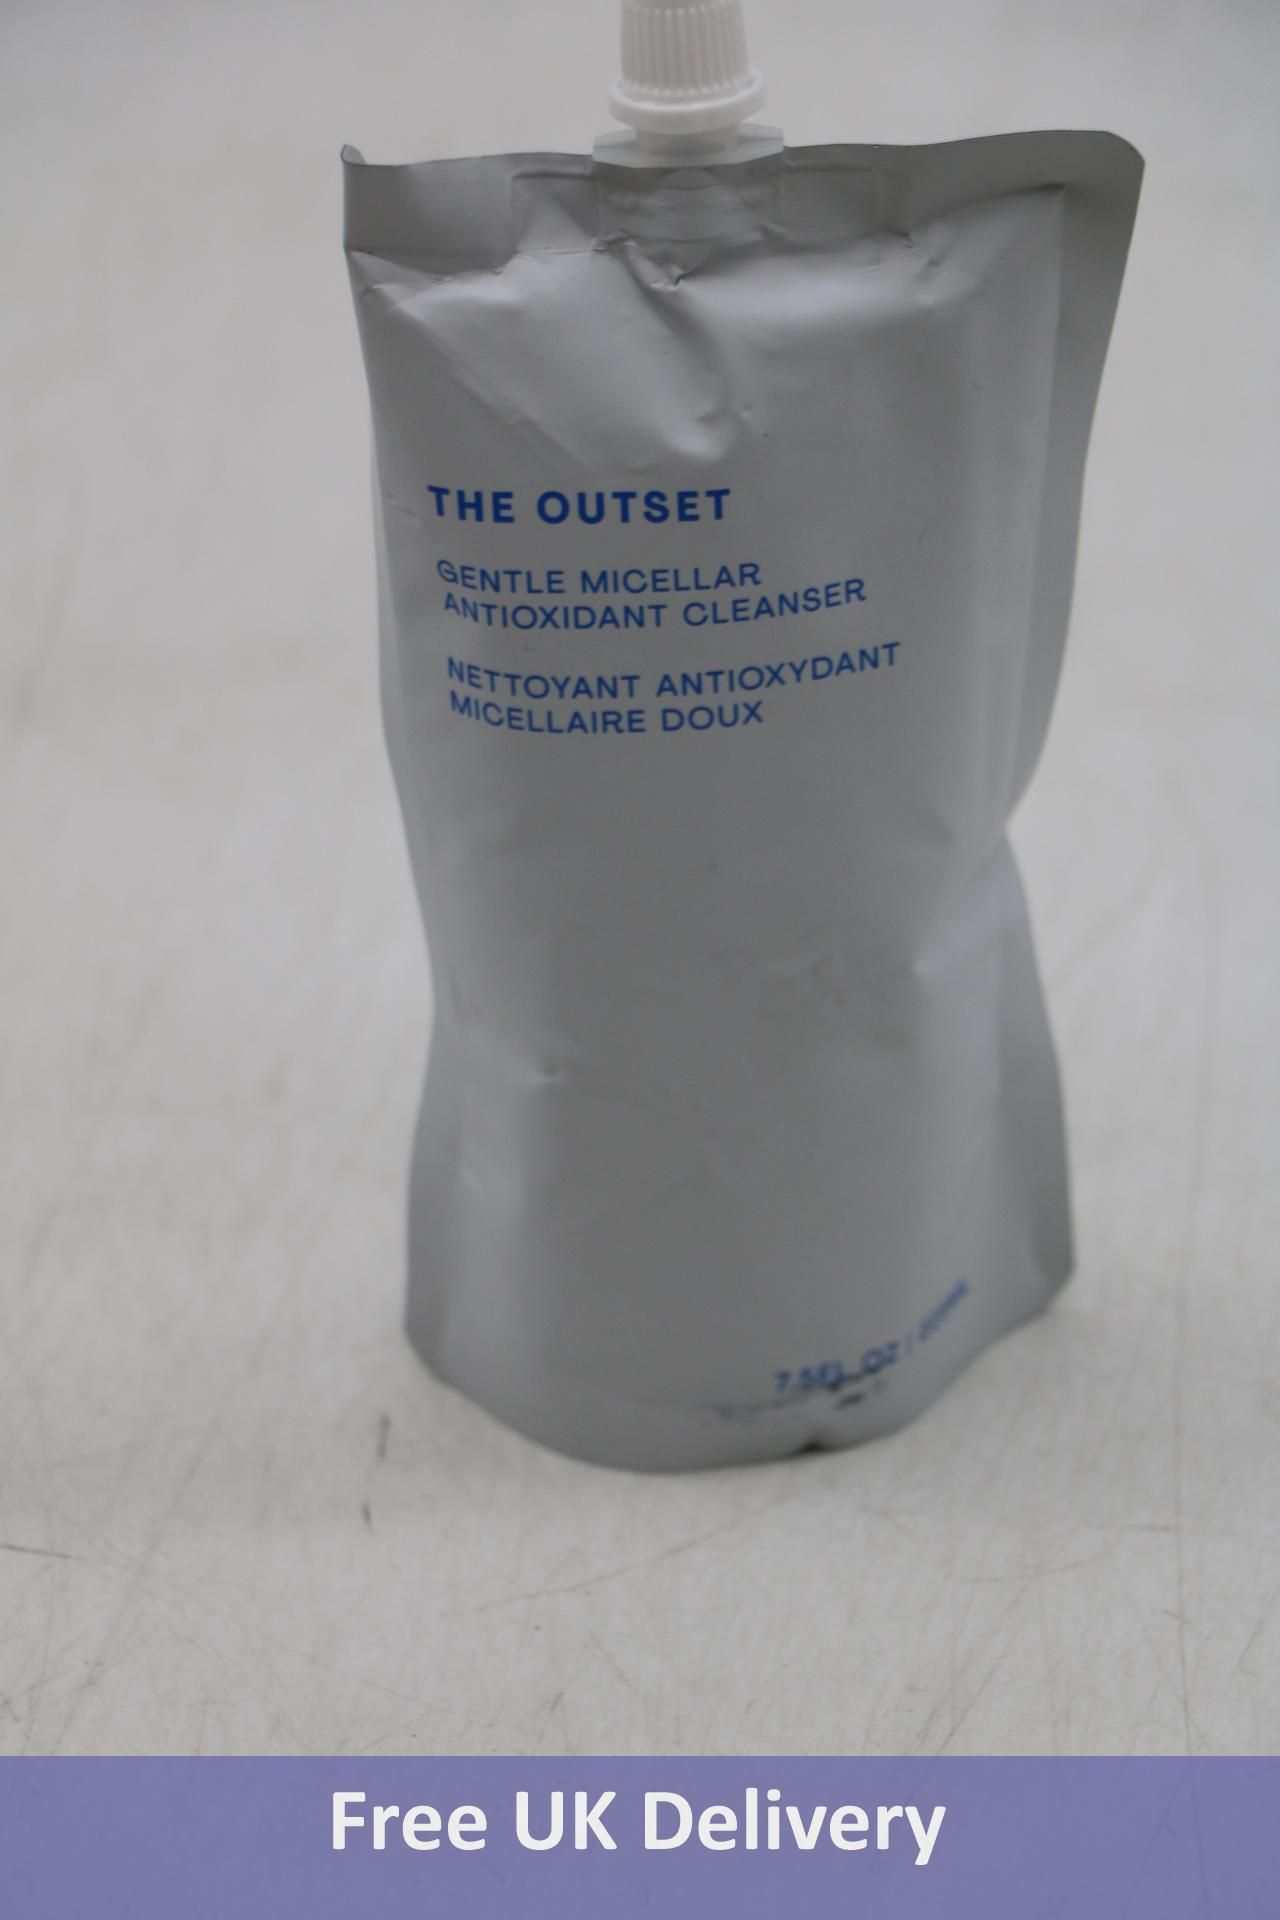 Three The Outset Gentle Micellar Antioxidant Cleanser, 225ml